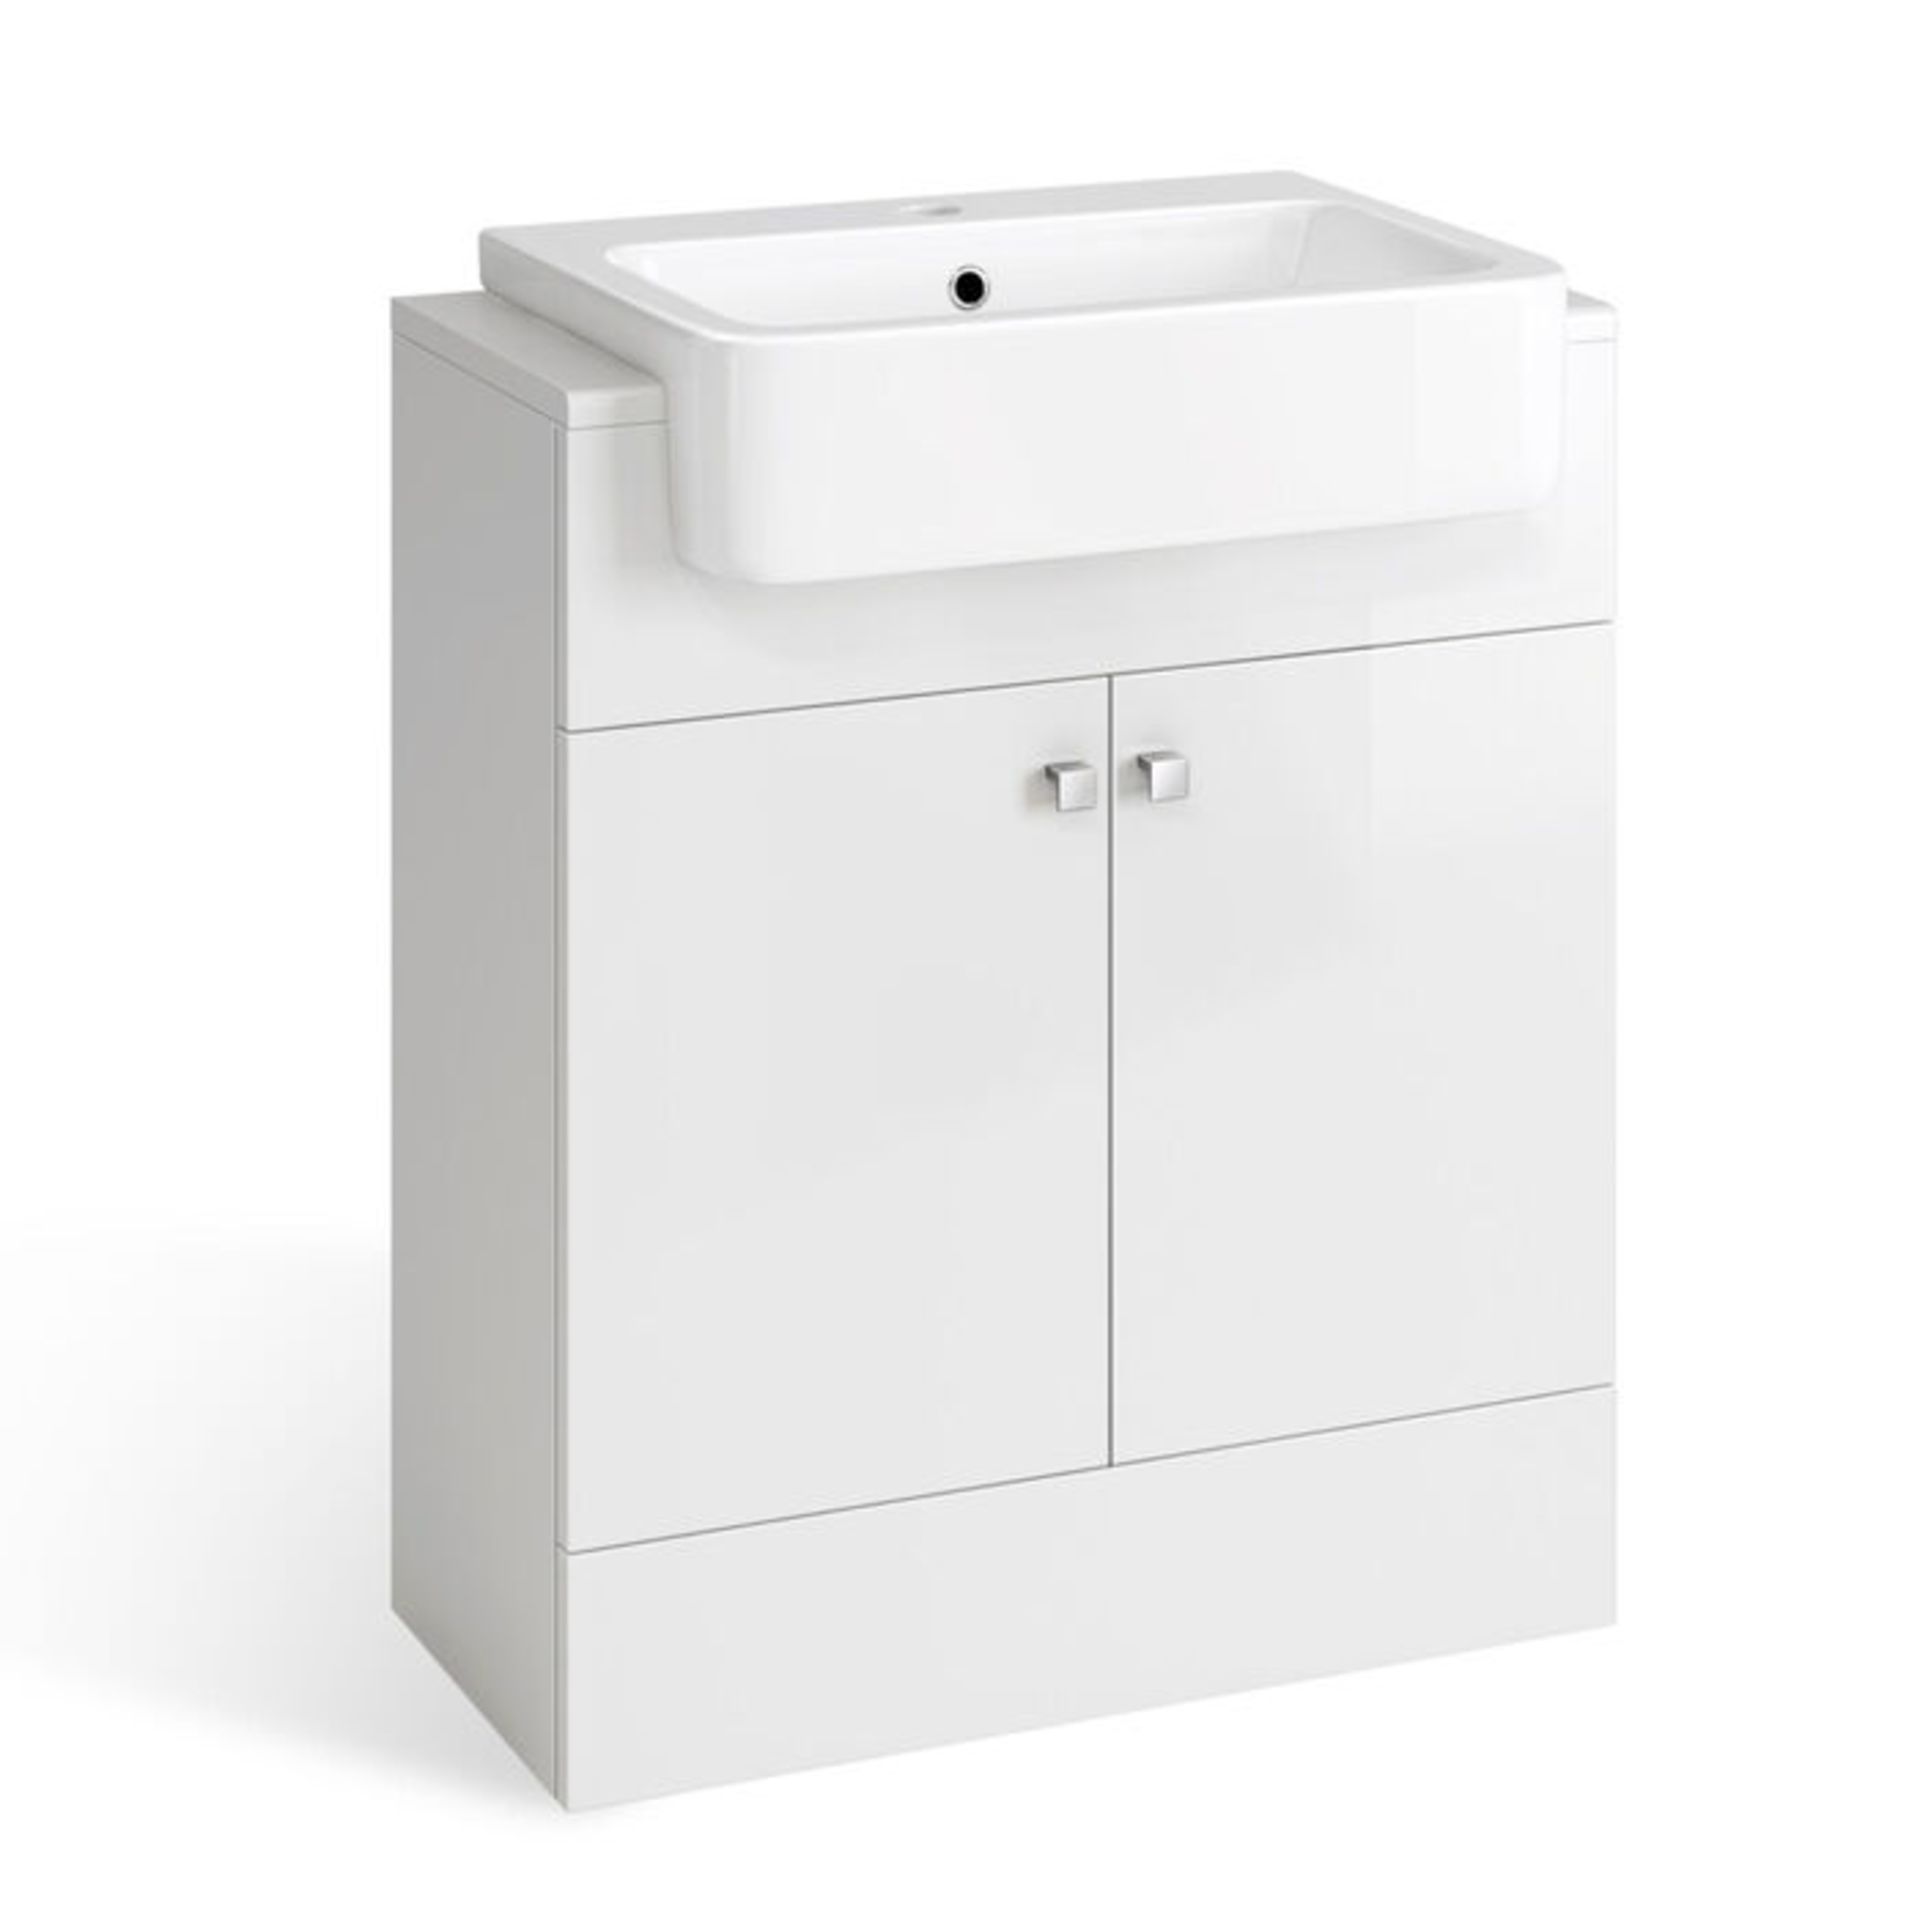 BRAND NEW BOXED 660mm Harper Gloss White Sink Vanity Unit - Floor Standing. RRP £749.99.Comes... - Image 4 of 4